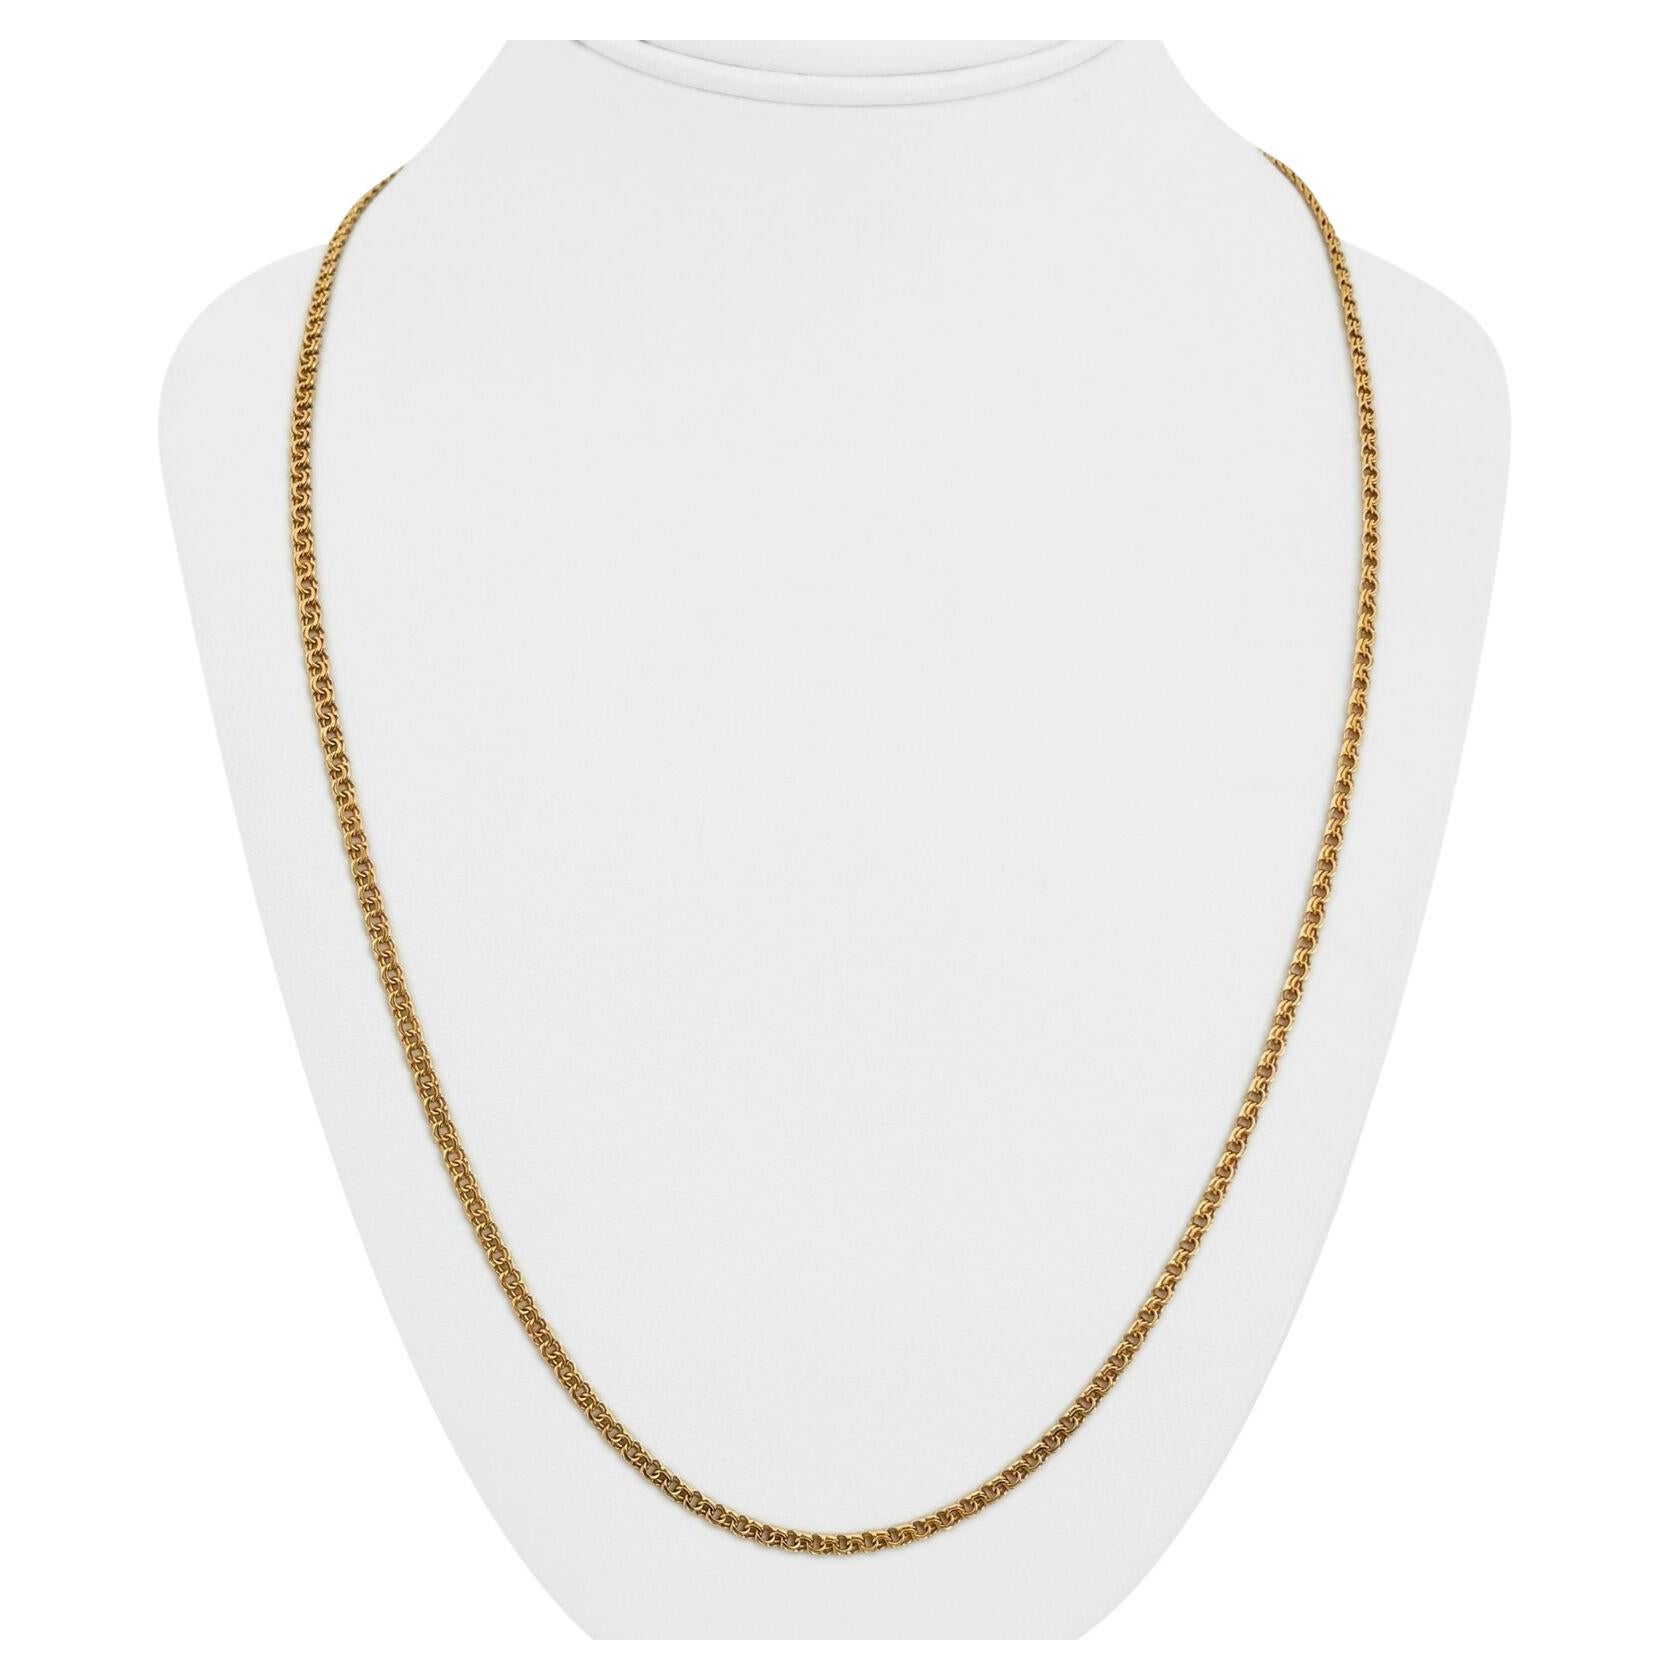 19 Karat Portuguese Yellow Gold Solid Thin Double Curb Link Necklace